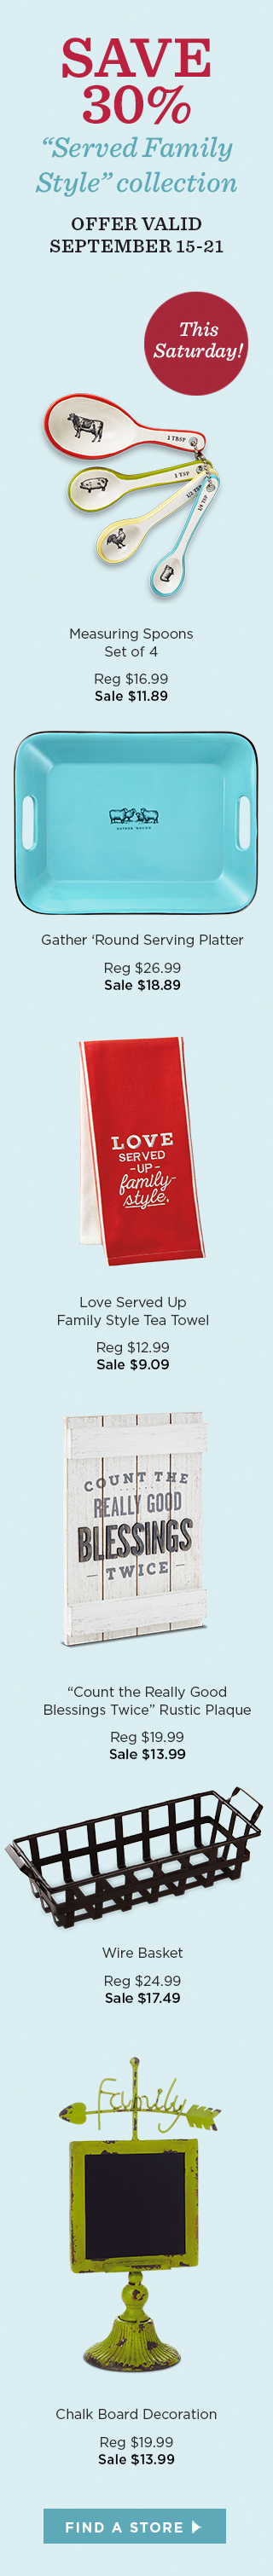 Save 30% on 'Served Family Style' collection - Starts Saturday